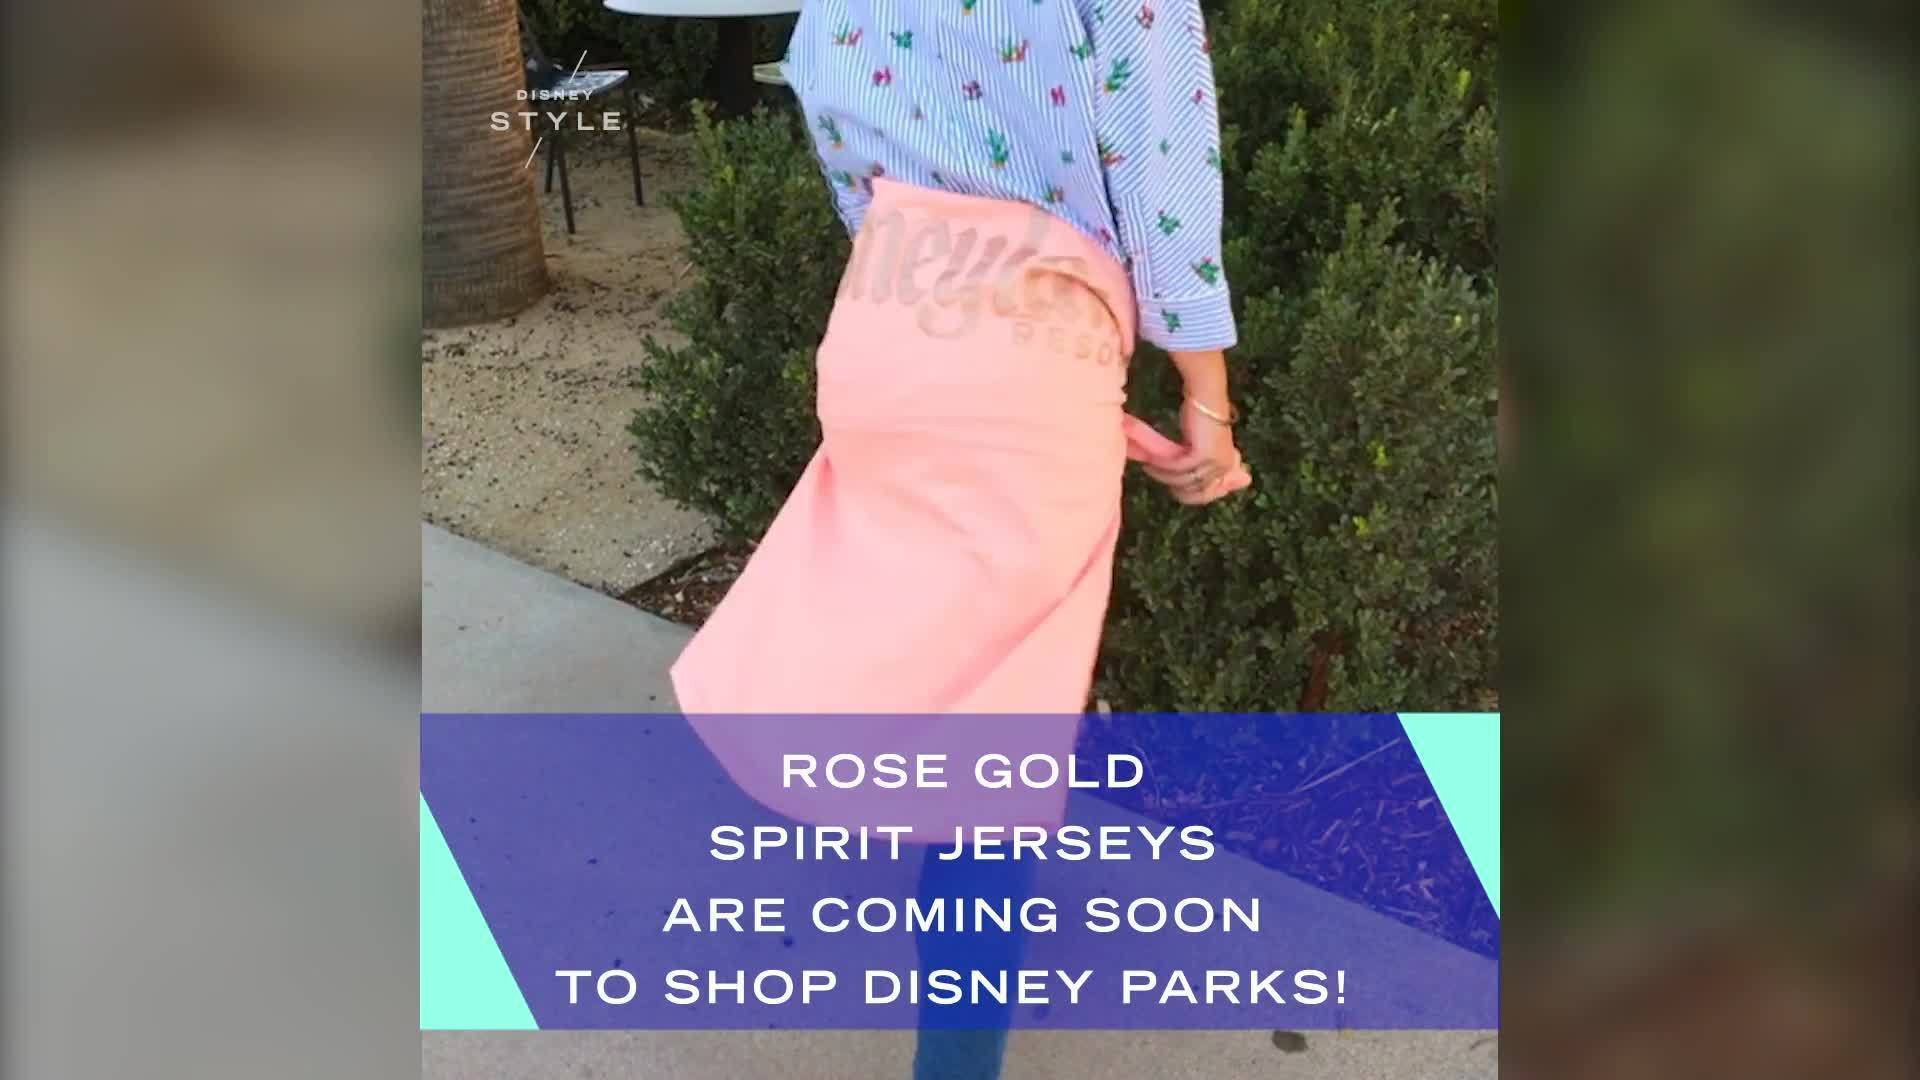 Rose Gold Spirit Jerseys Are Coming Soon to Disney Parks